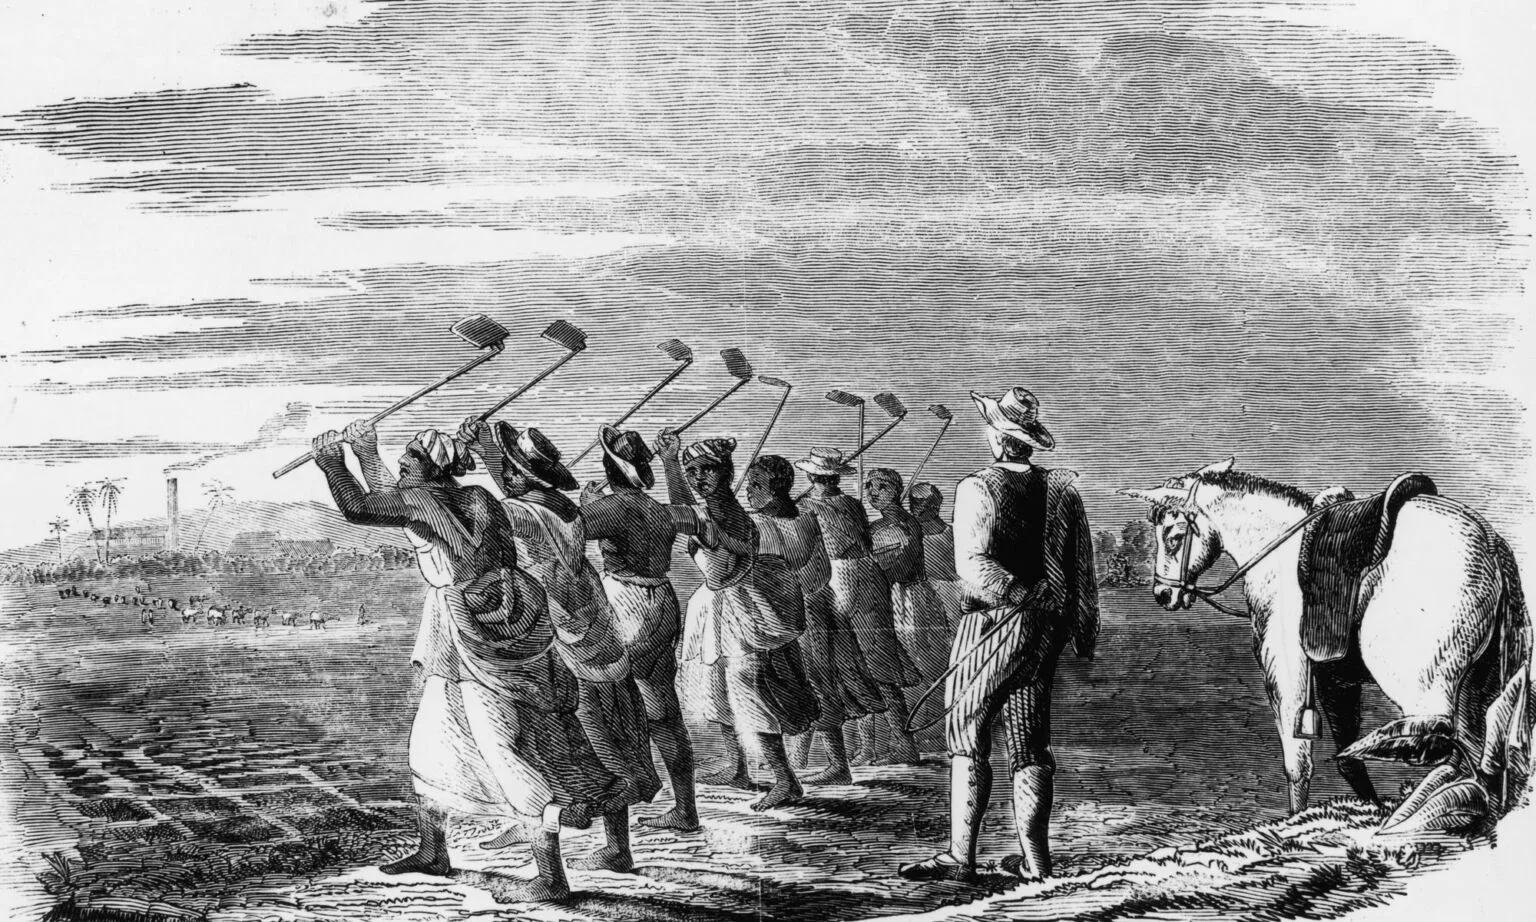 Native workers 'cane hoeling' on a sugar plantation in the West Indies, 1849.